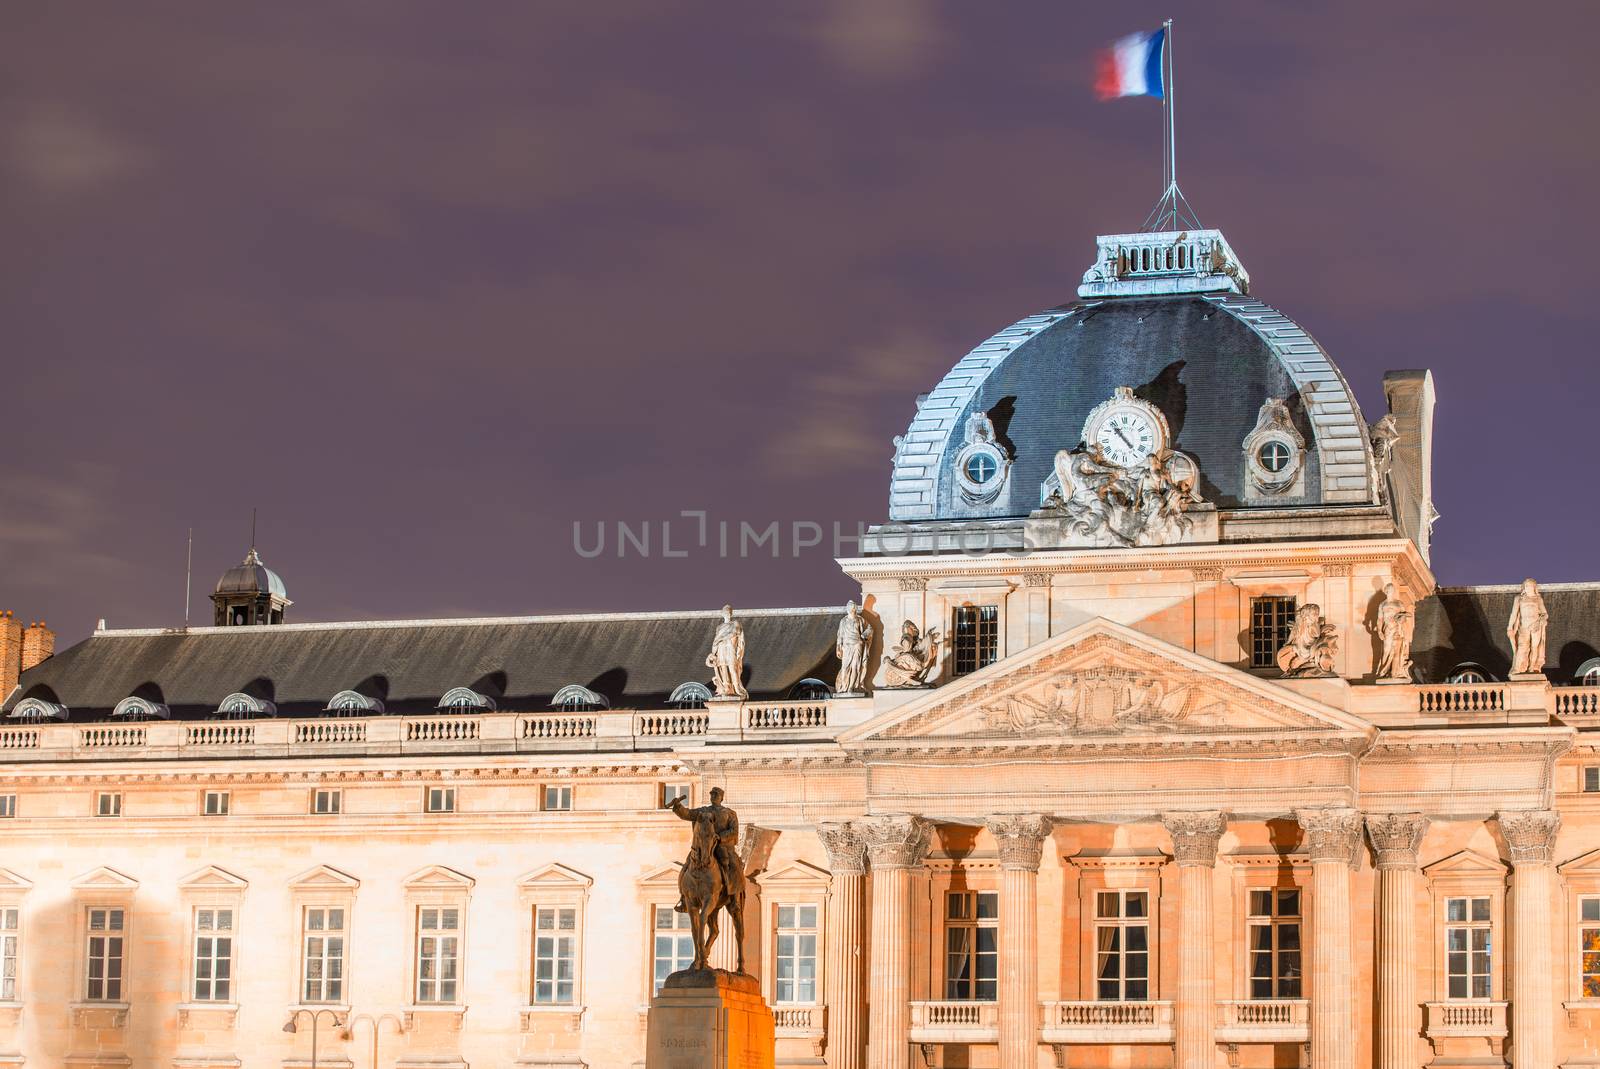 Ecole Militaire in Paris, Military School building at night by jovannig